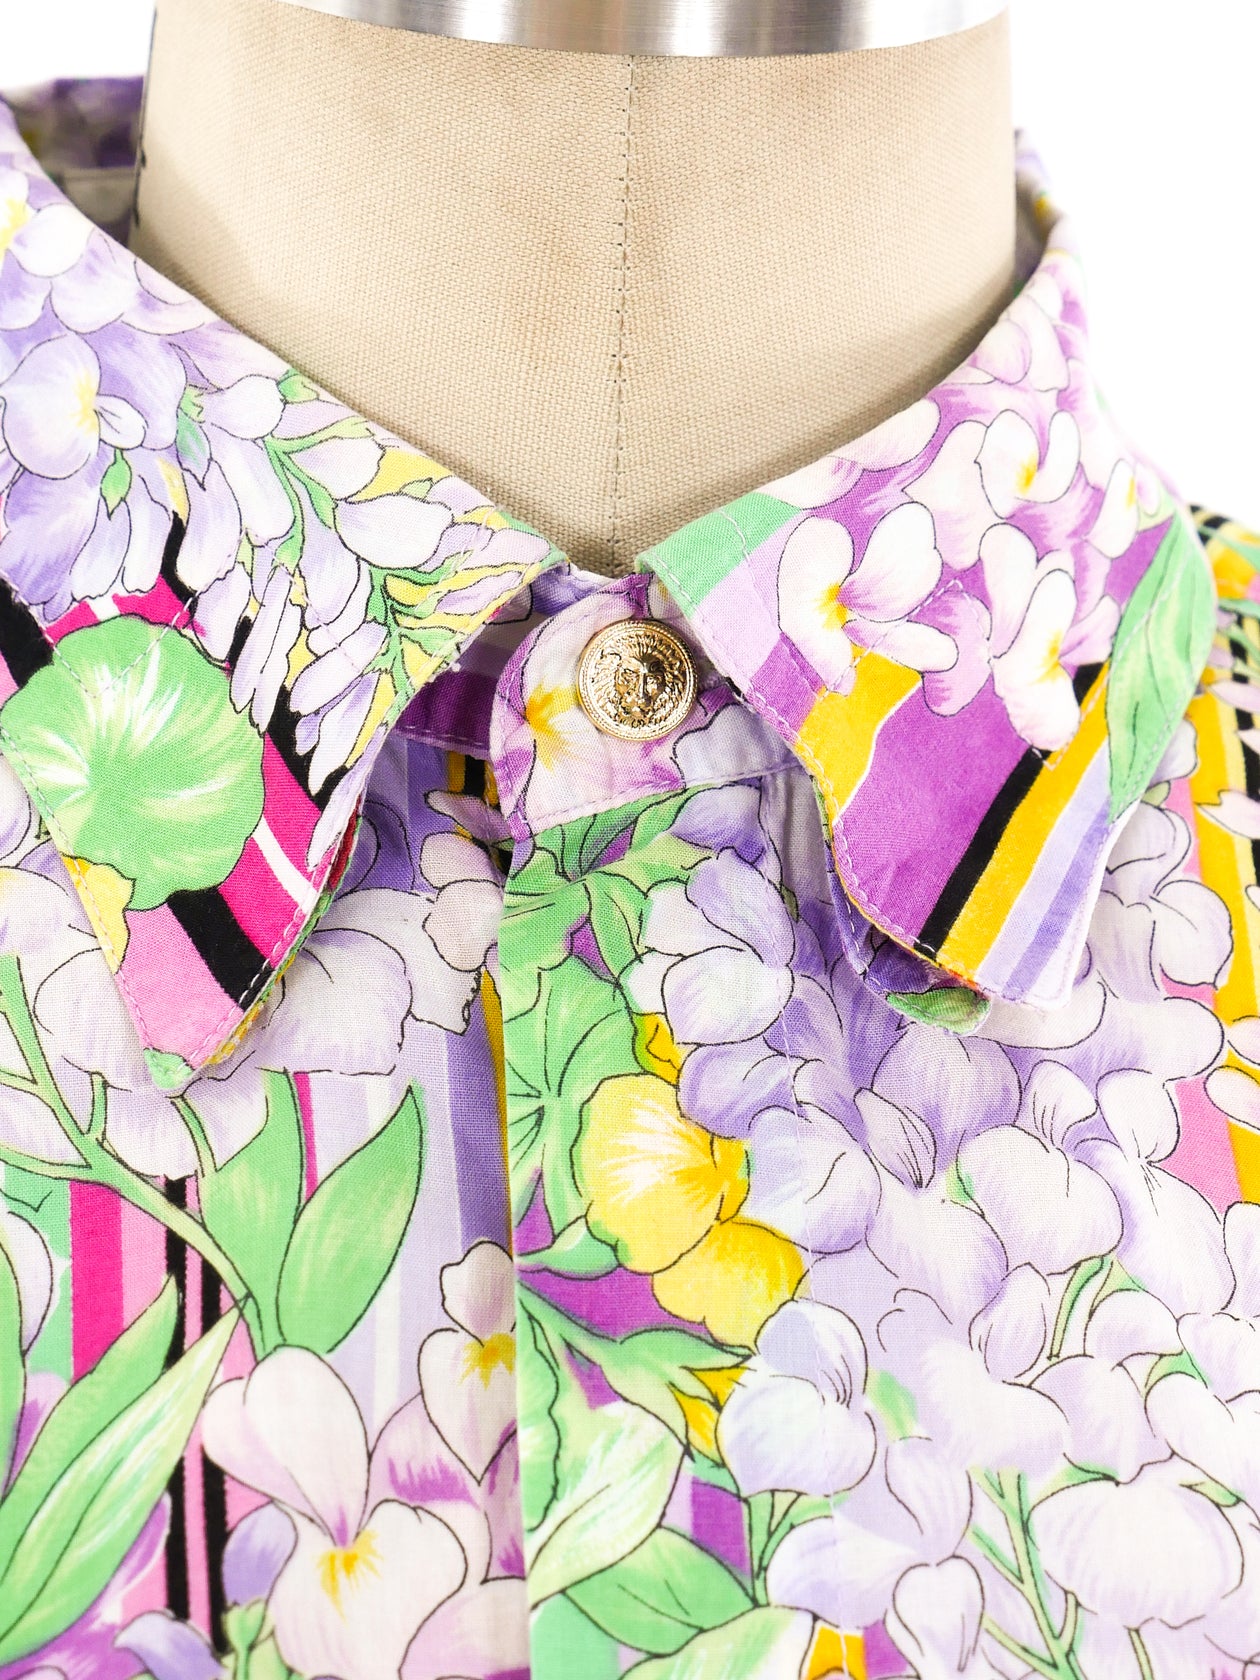 Versus by Gianni Versace Floral Printed Shirt